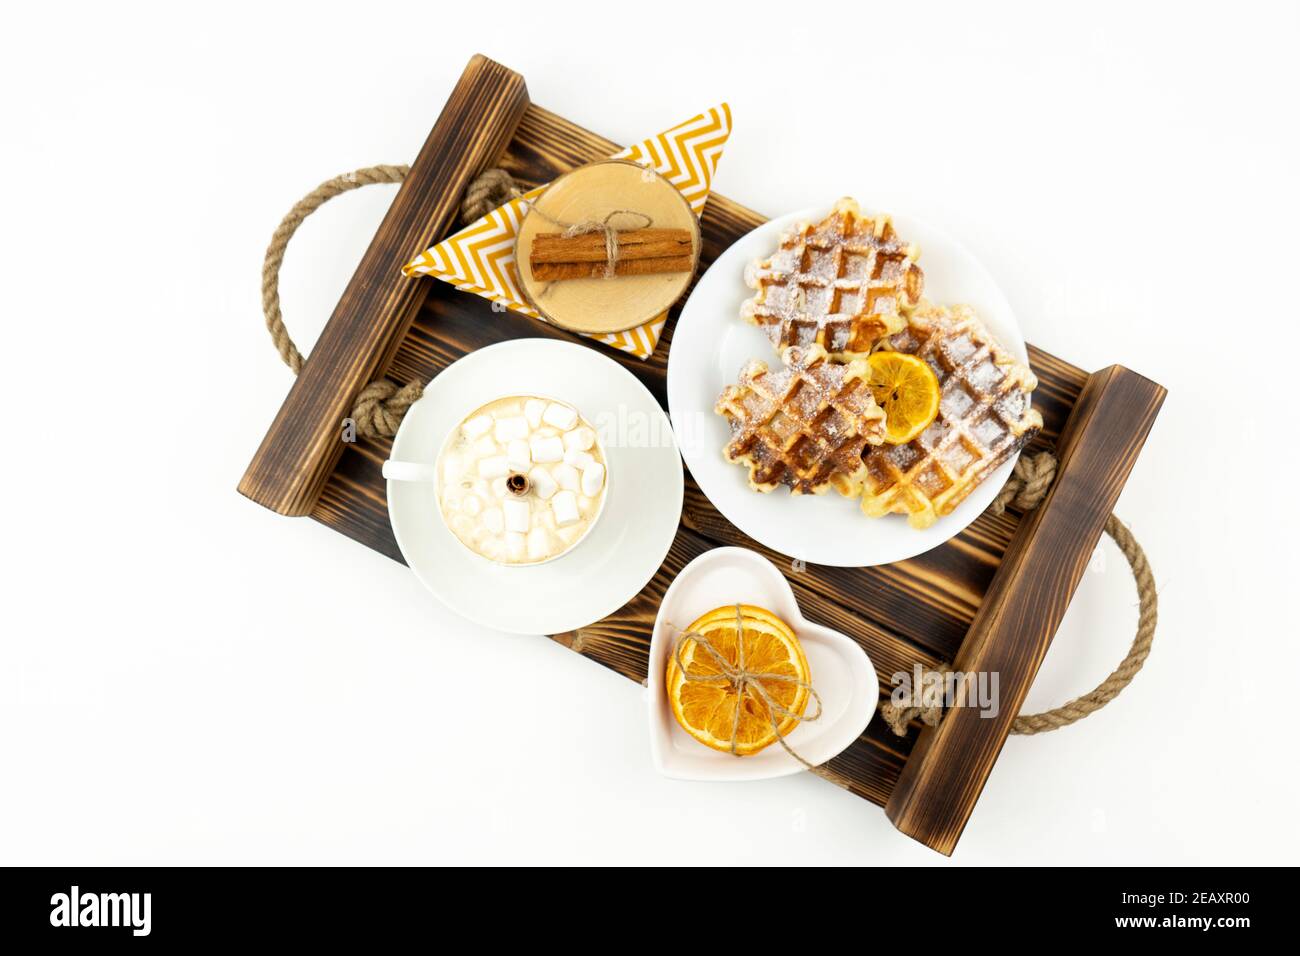 Early breakfast coffee with marshmallows and a stick of cinnamon and Belgian waffles lie on a wooden tray Stock Photo